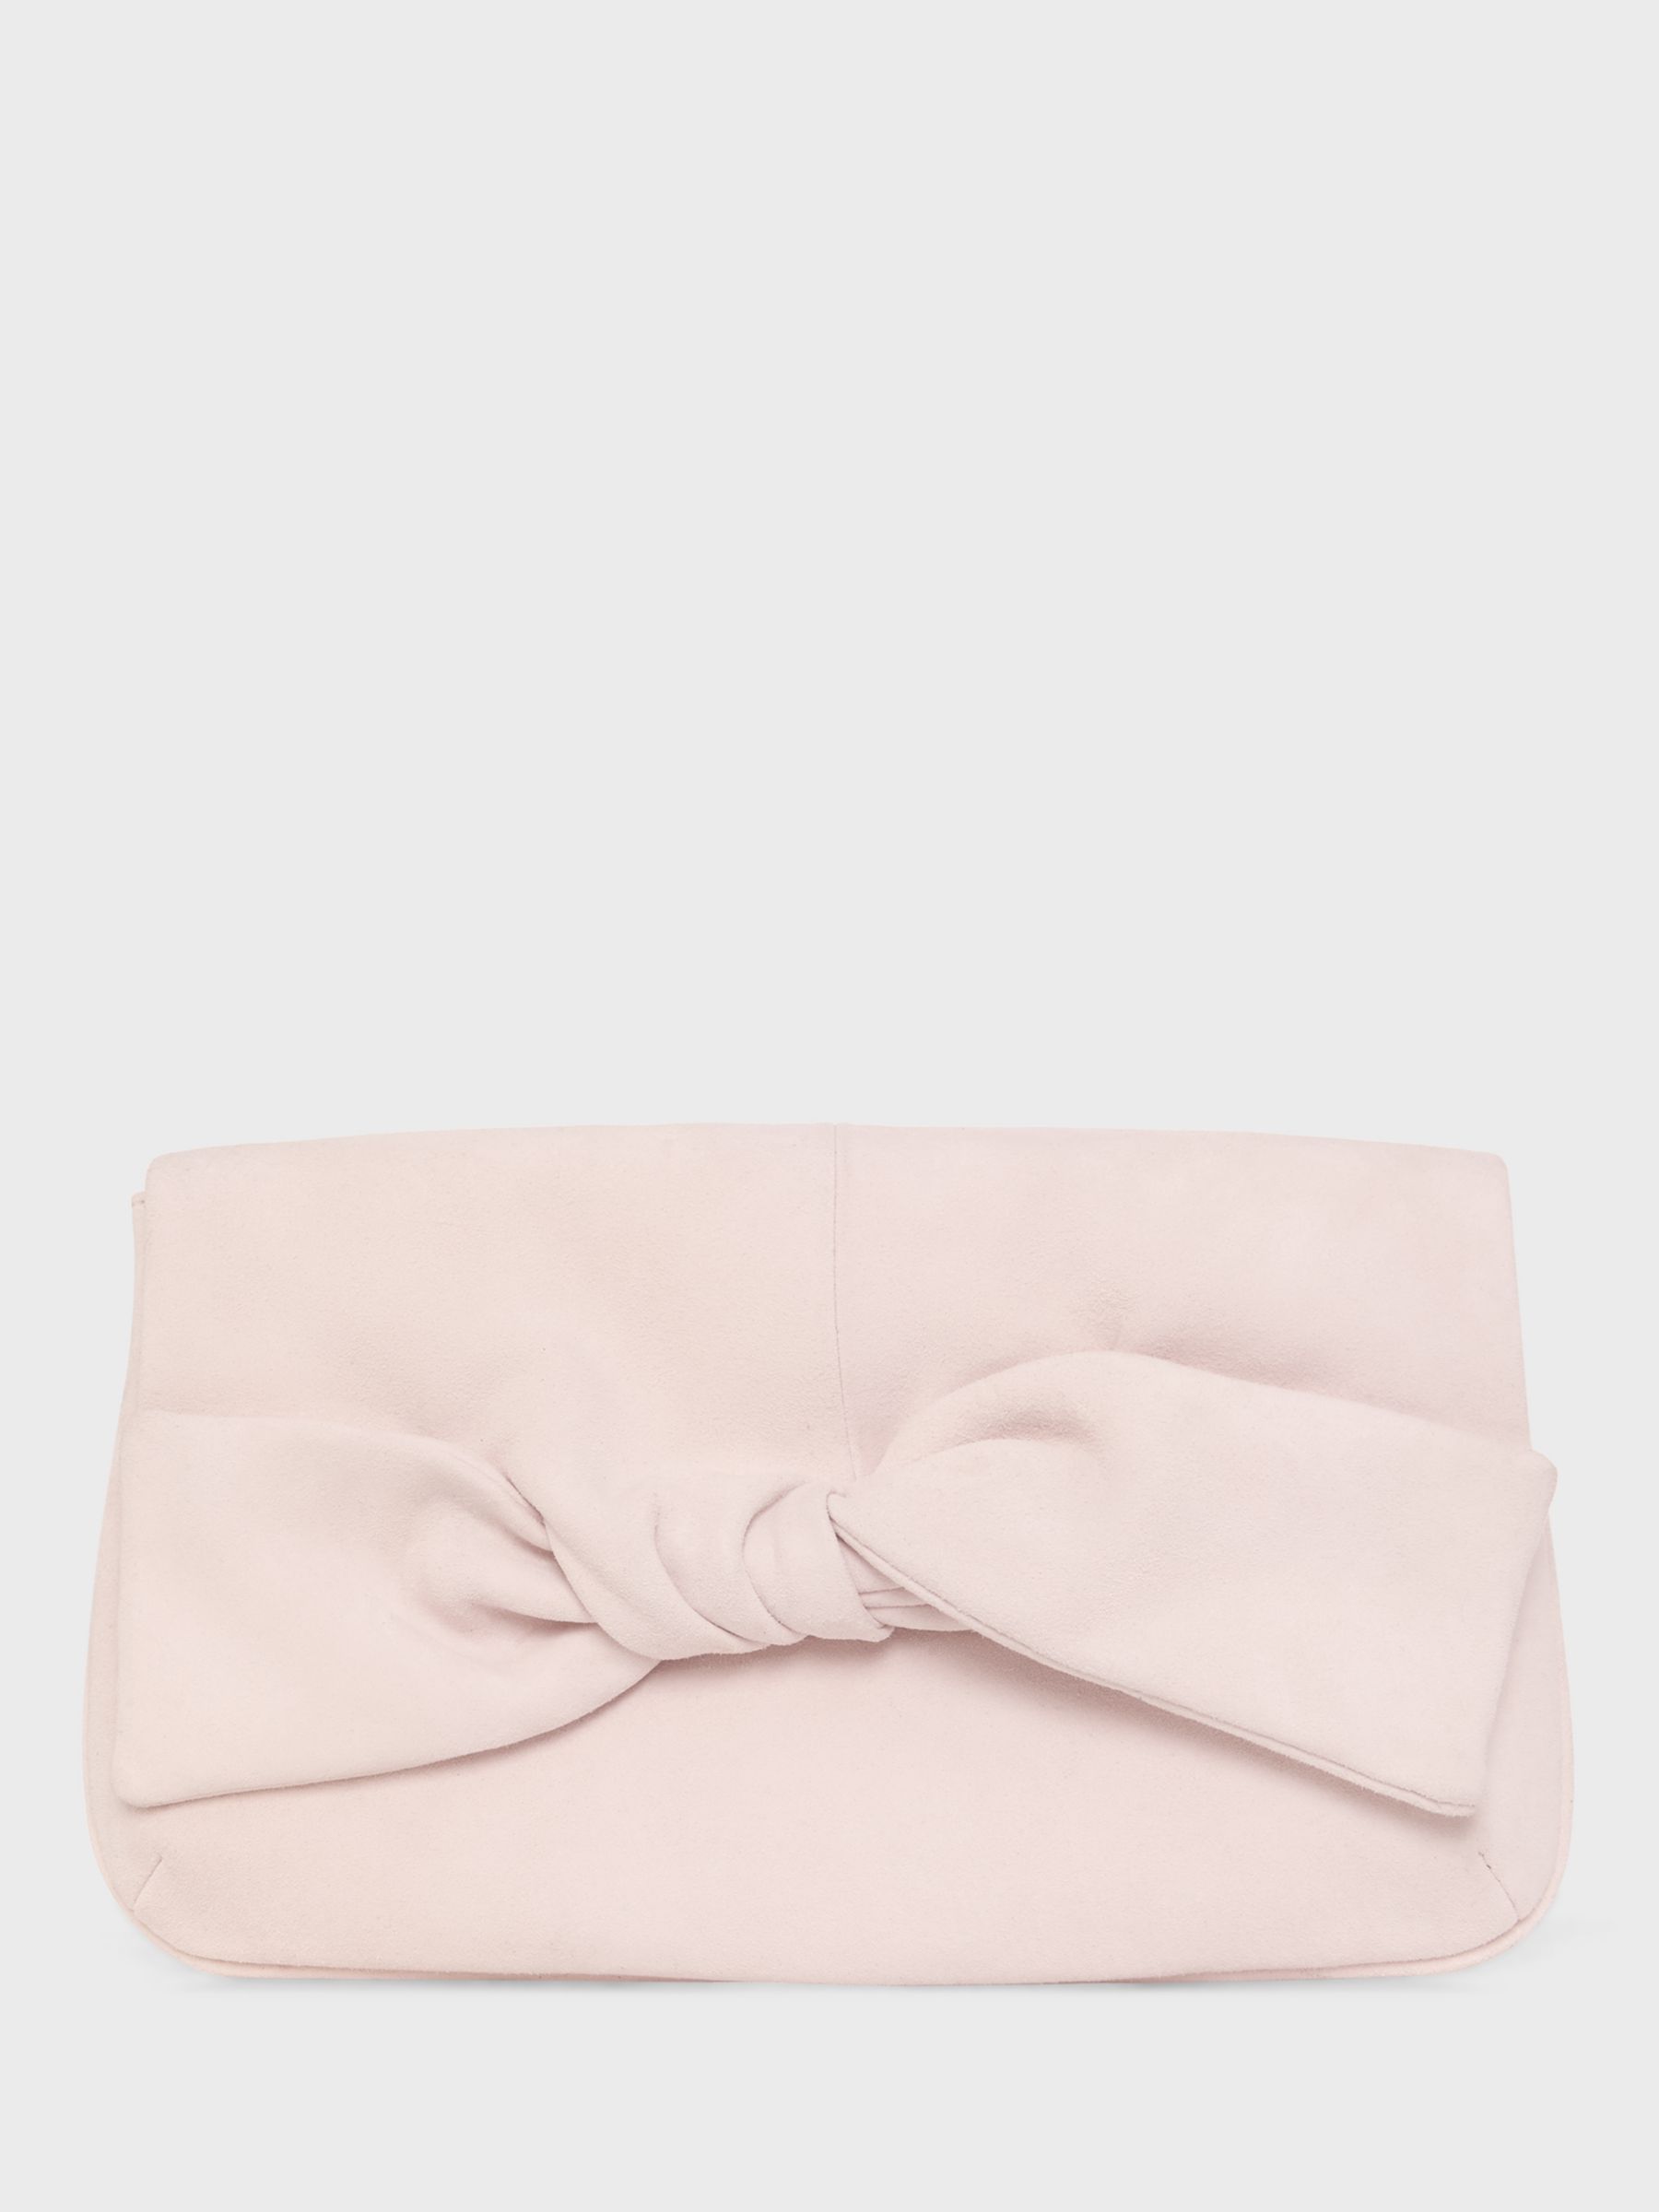 Hobbs Milly Bow Clutch Bag, Bright Pink, Pale Pink, One Size